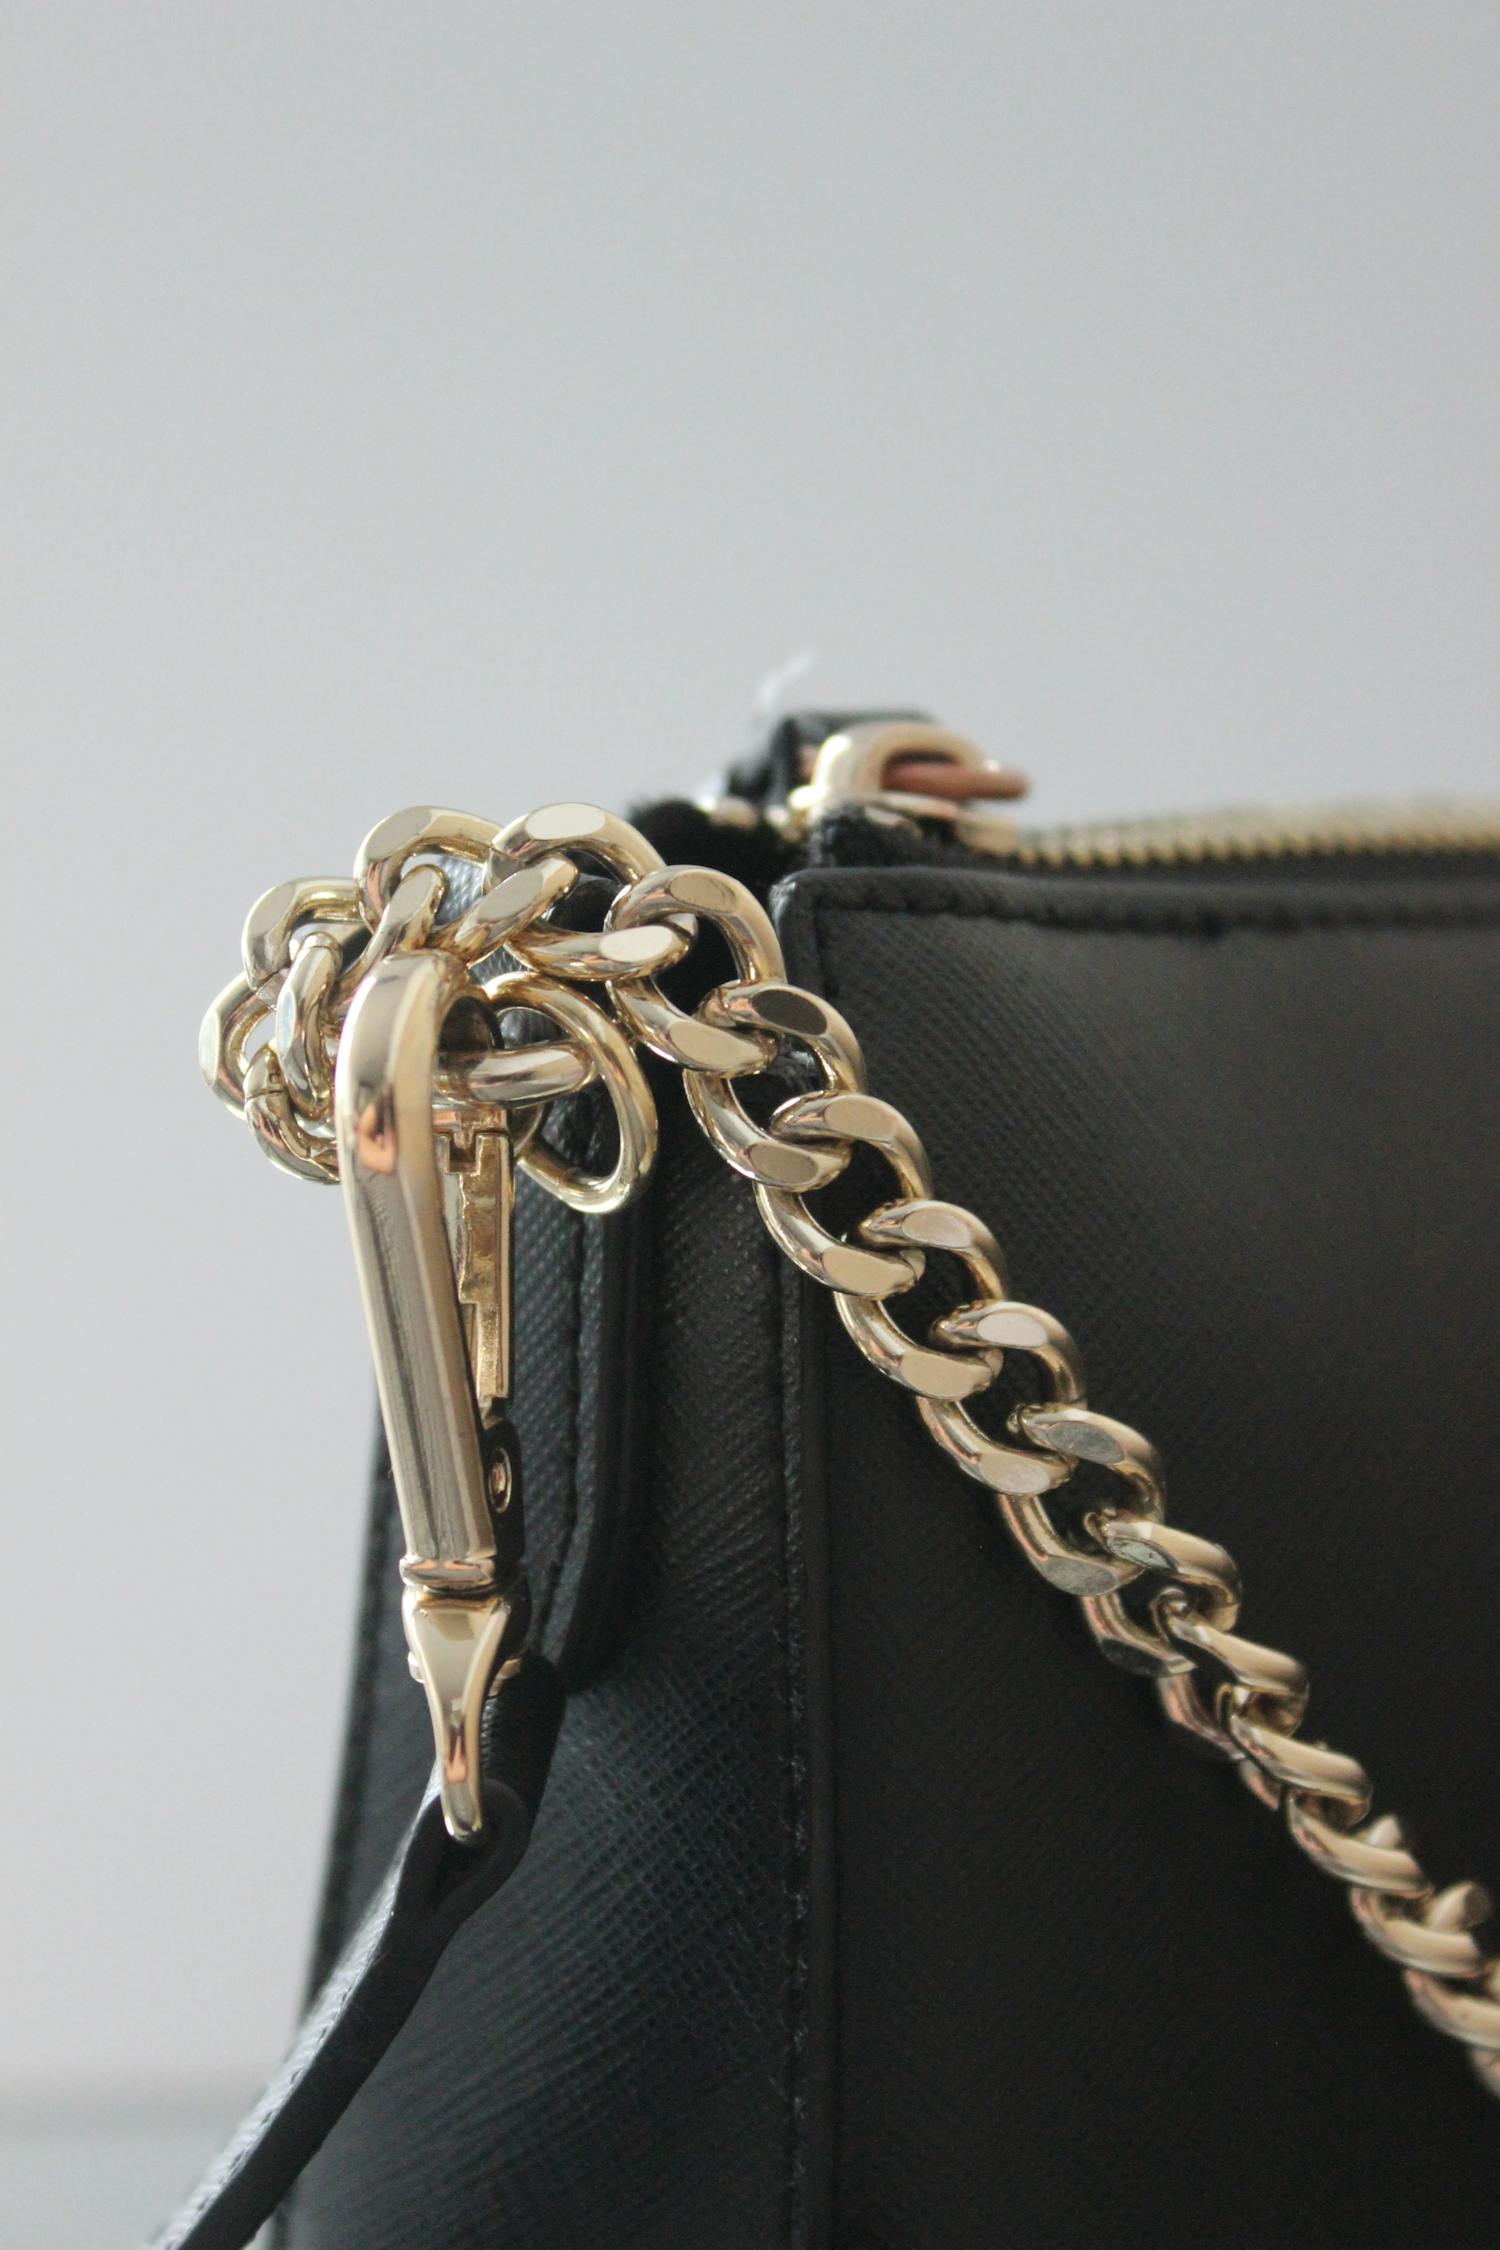 A Black Bag with Gold Chain · Free Stock Photo